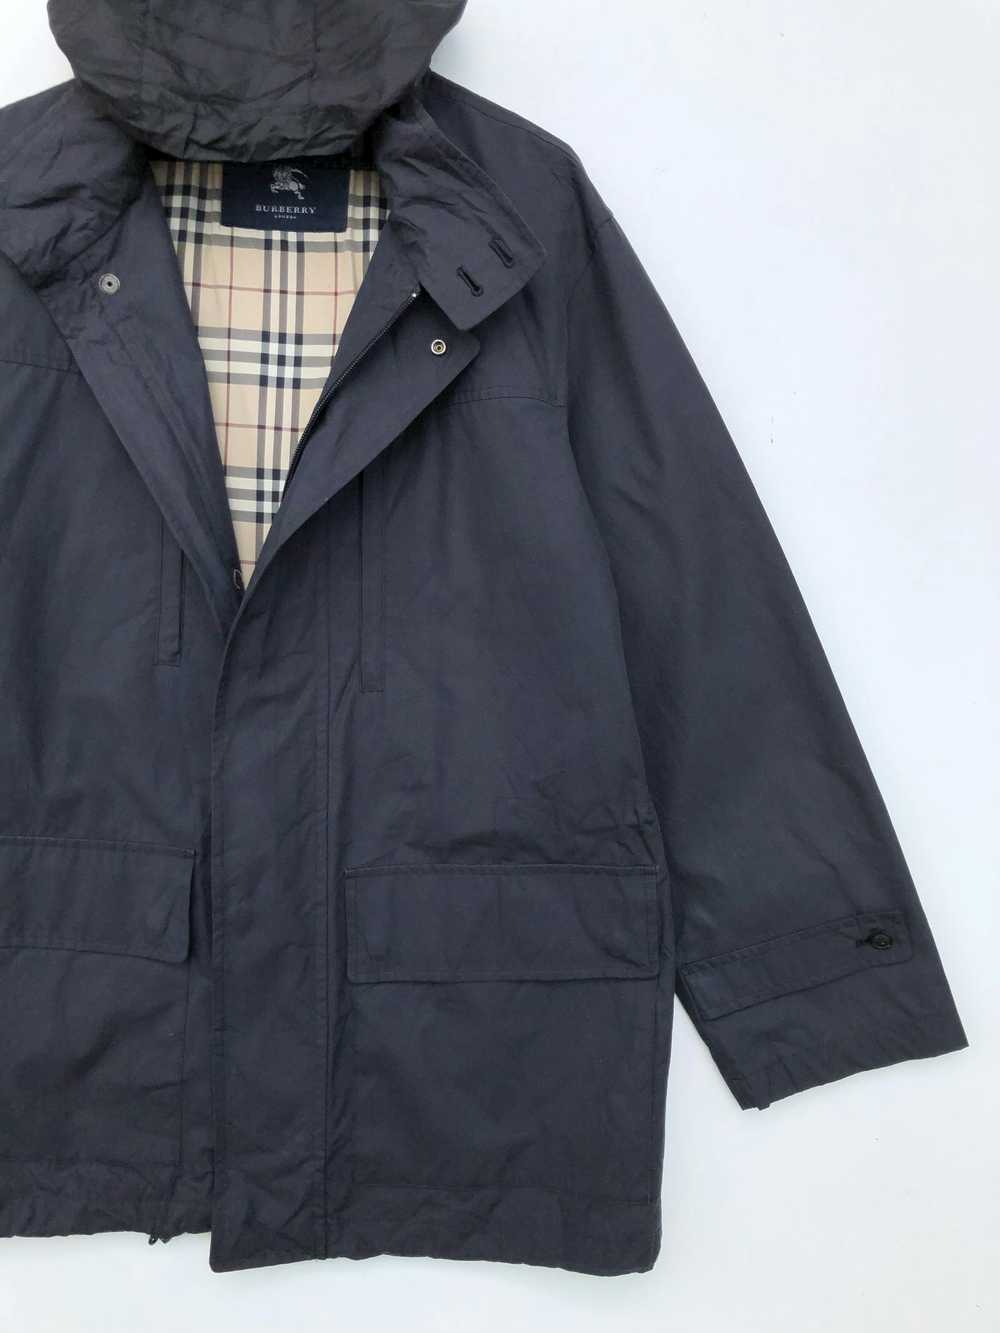 Burberry BURBERRY LIGHT JACKET MADE IN JAPAN - image 4